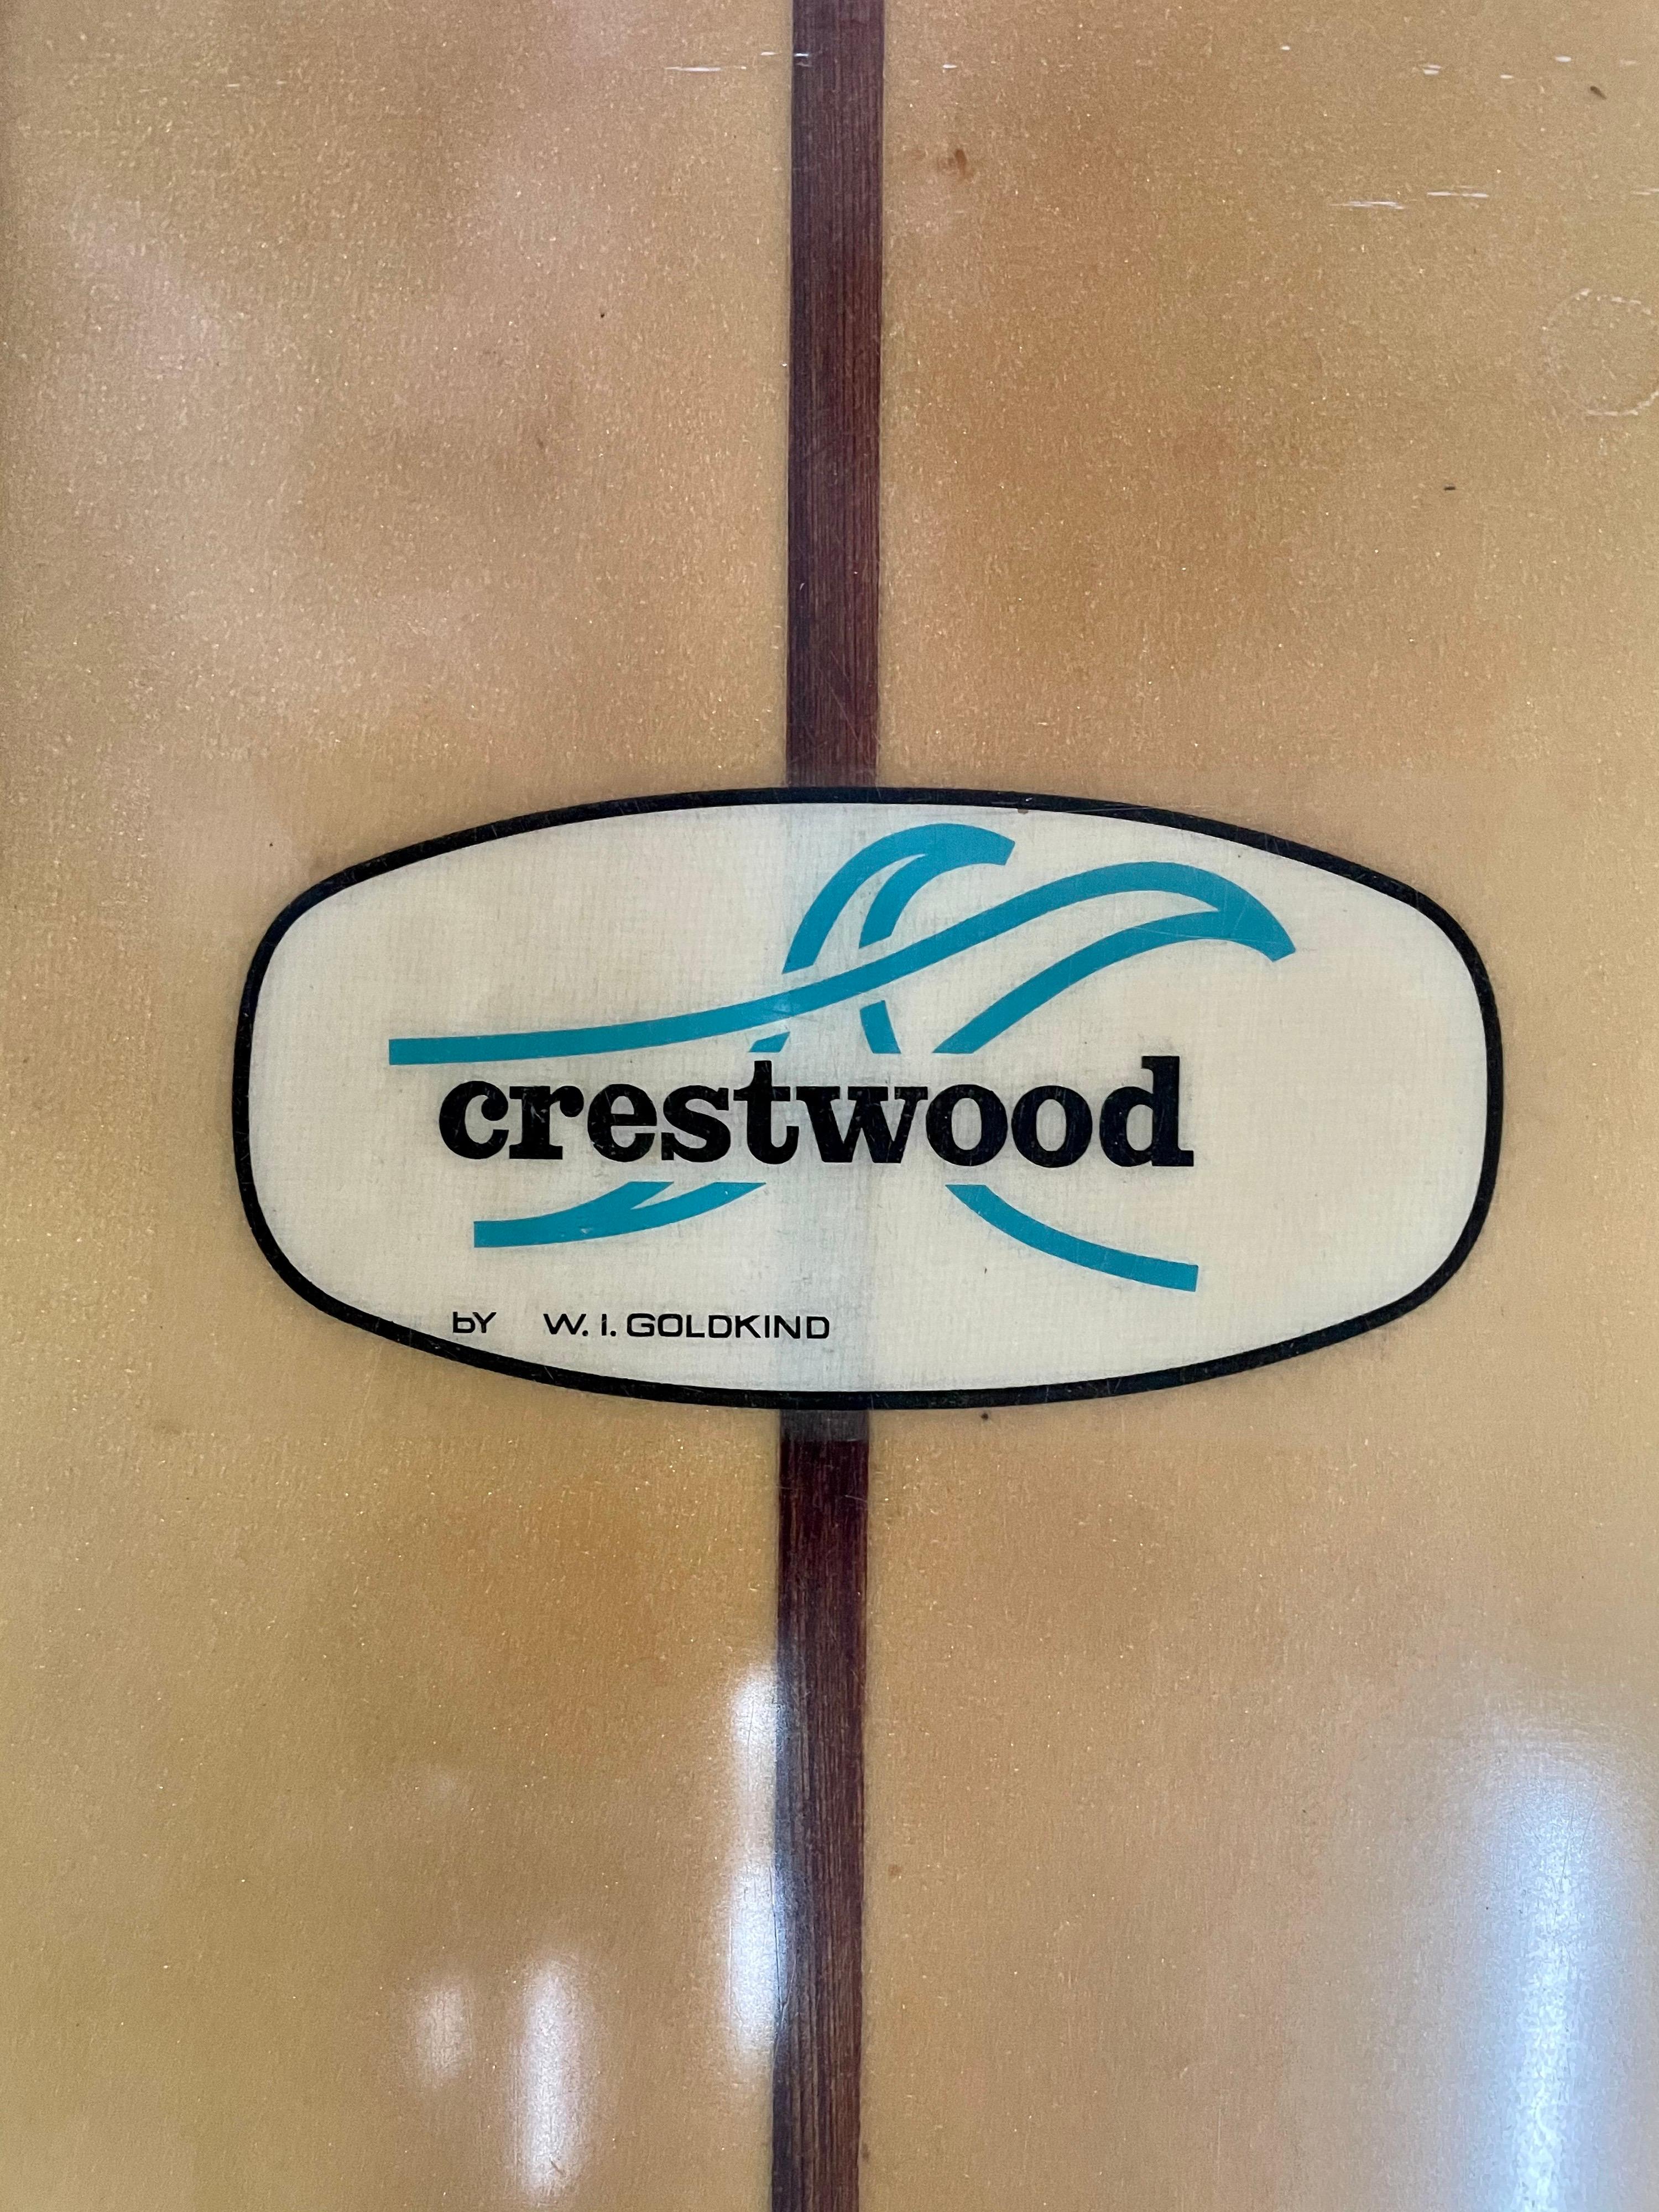 This is an all vintage, fully restored 1960s surfboard (longboard) by Crestwood. It is roughly over 10 feet long. This lovely piece of history was lovingly restored and collected by an avid surfer before it came to Gustavo Olivieri antiques.